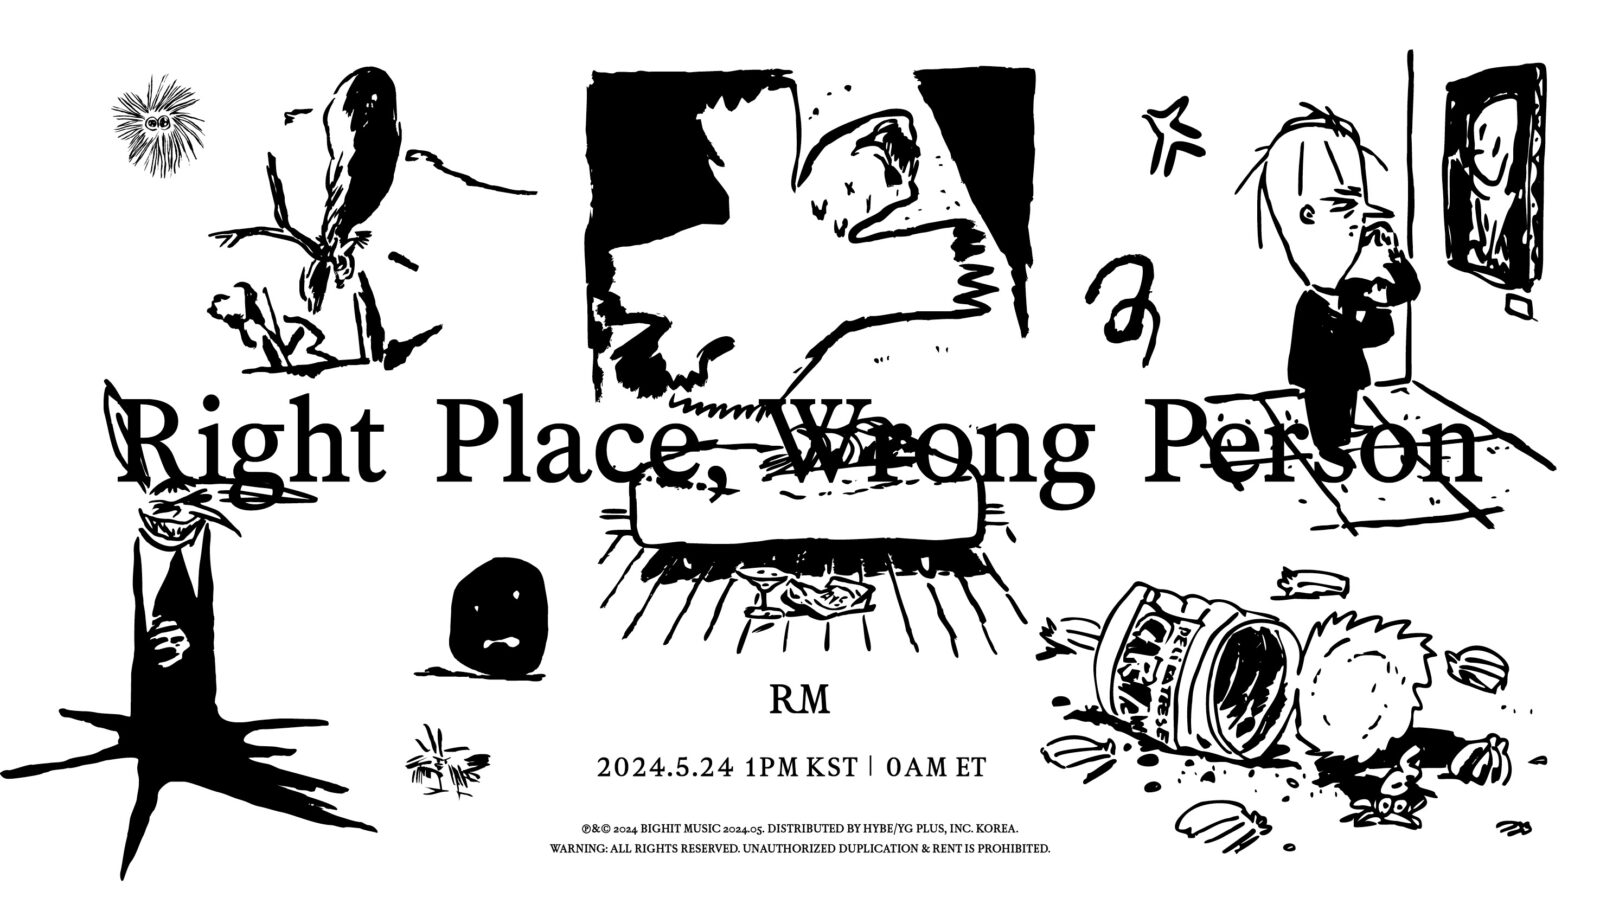 BTS RM NEW ALBUM RIGHT PLACE WRONG PERSON